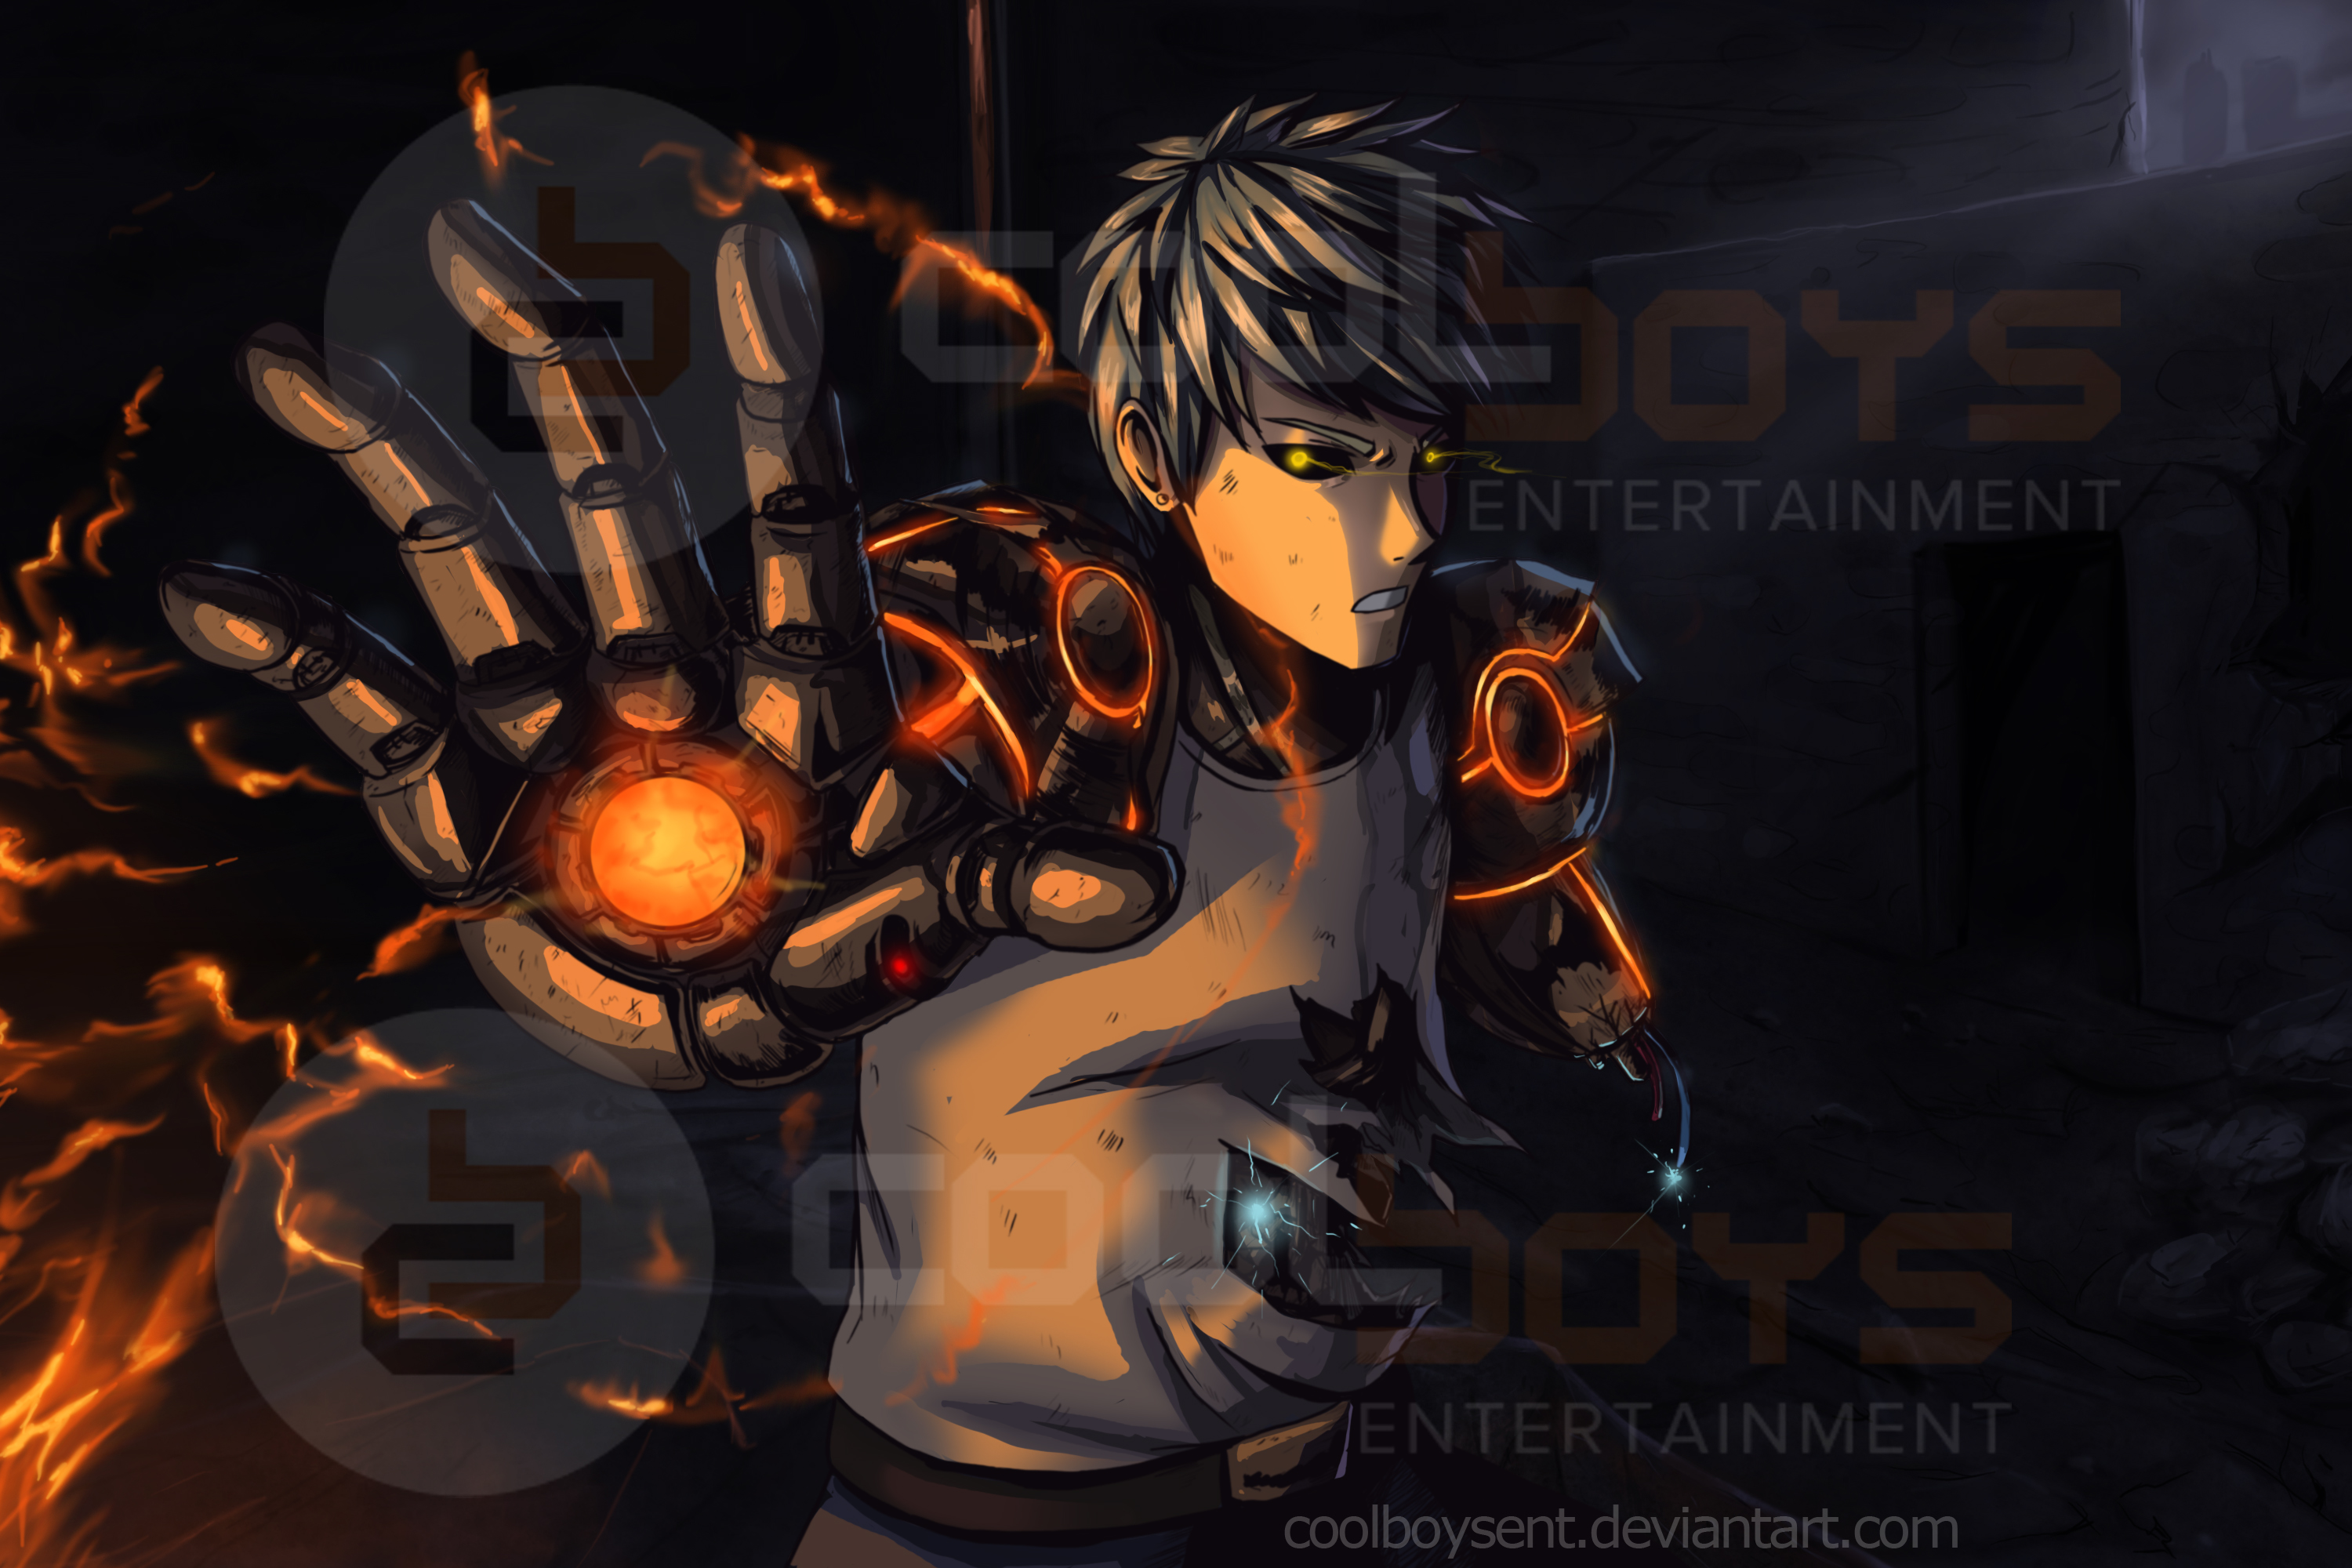 genos_by_coolboysent-d9yixgr.jpg